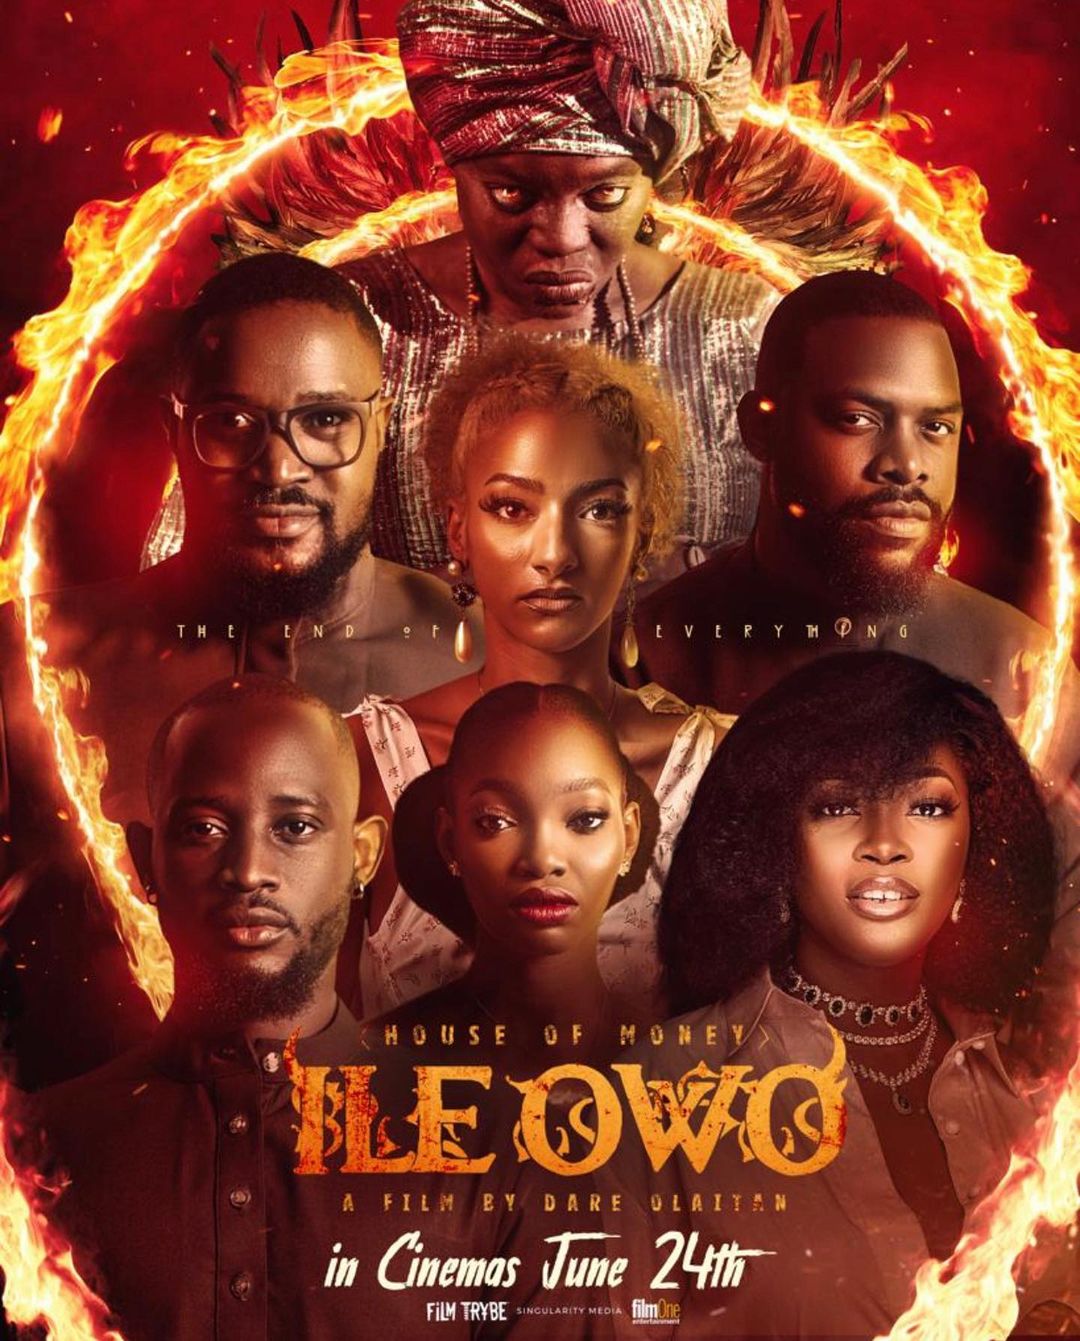 285068368 2798052180488950 5946140566355668774 n - Dare Olaitan On The Revival Of Nollywood Monsters, Making His Horror Debut and His Growth as a Filmmaker